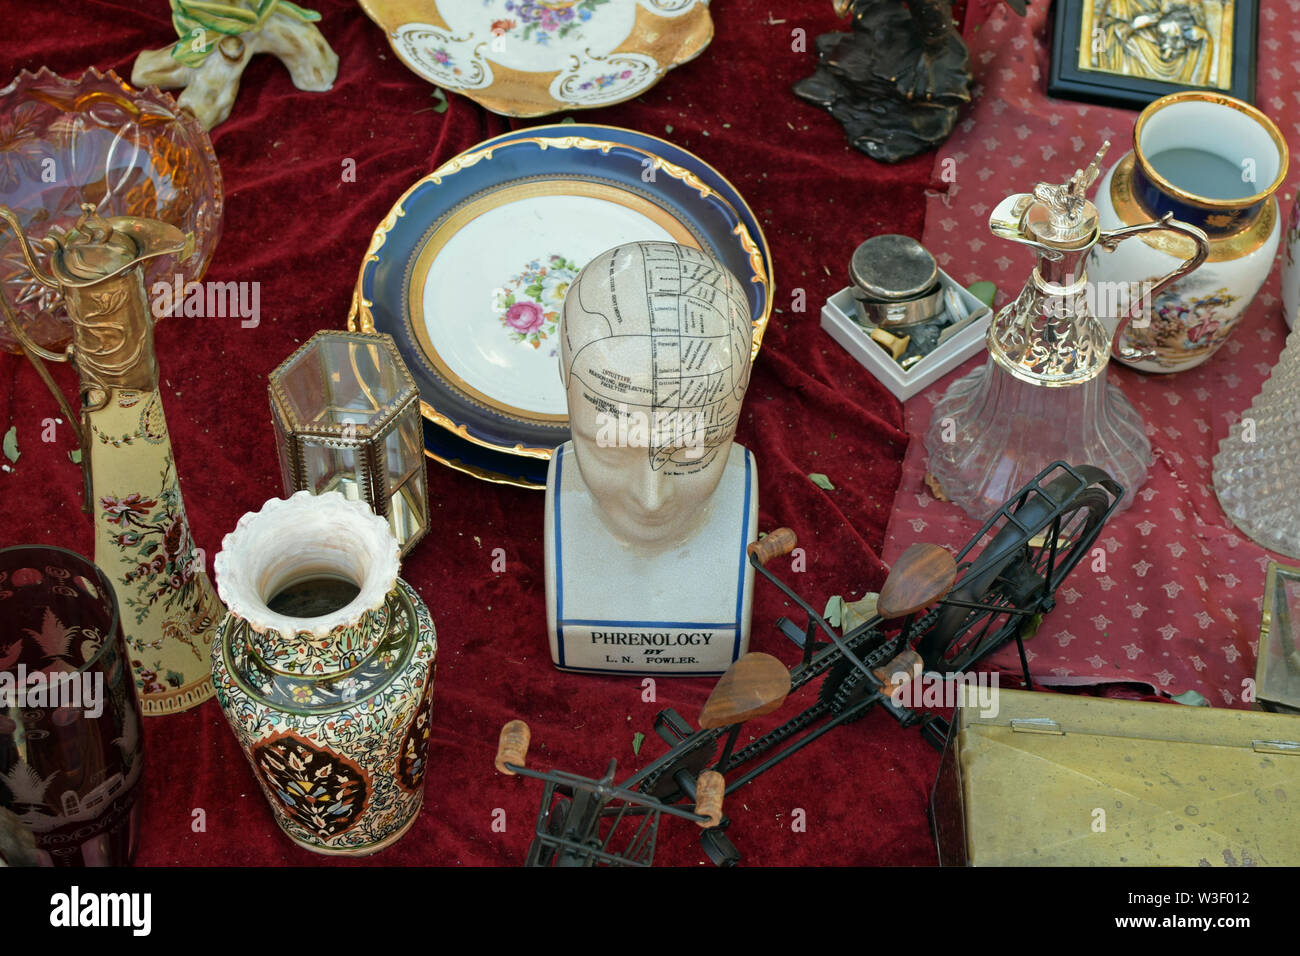 ATHENS, GREECE - AUGUST 14, 2016: Antique objects and porcelain phrenological bust with areas of the head assigned to specific character traits and br Stock Photo